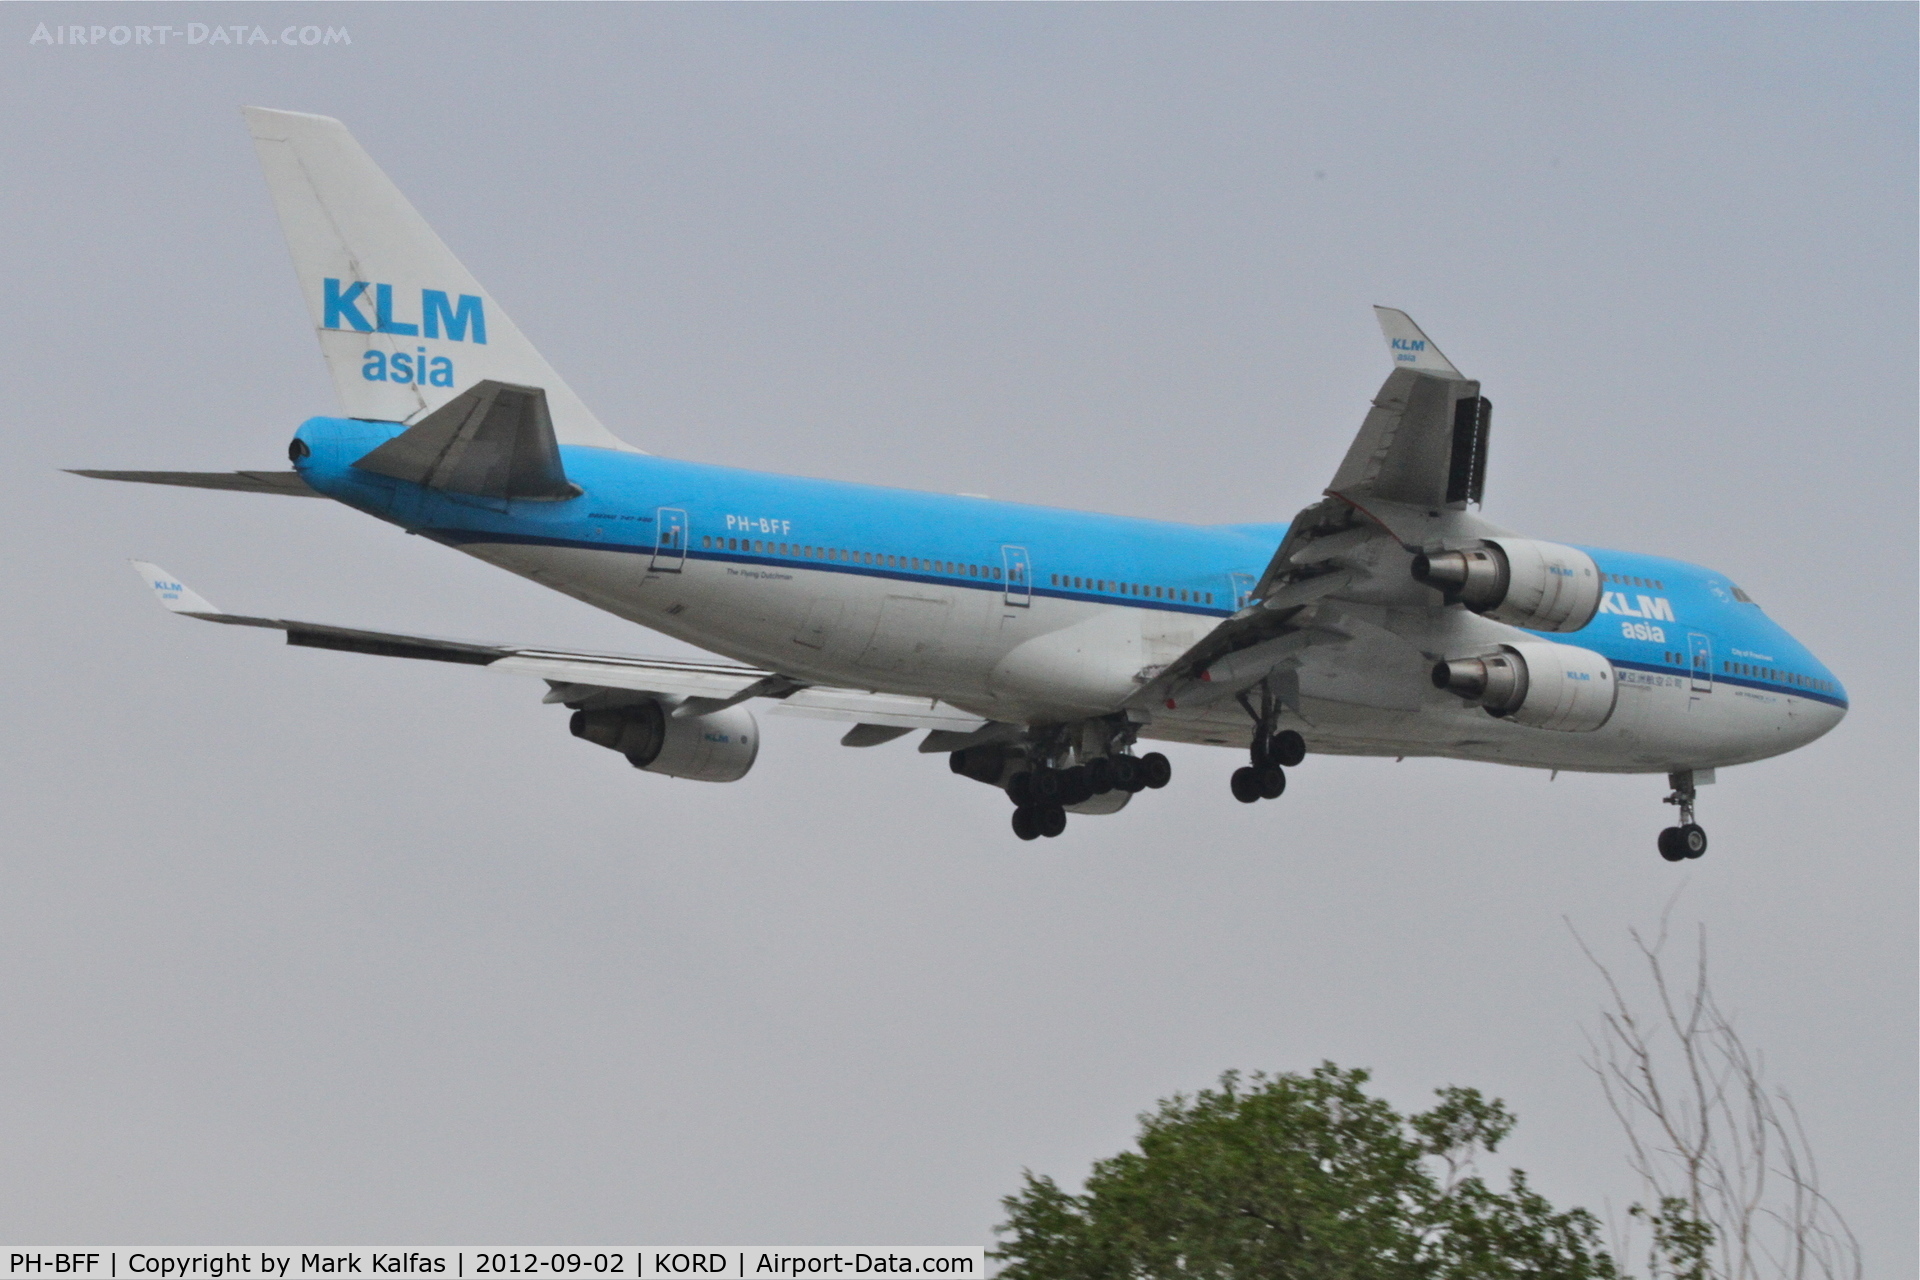 PH-BFF, 1990 Boeing 747-406BC C/N 24202, KLM Boeing 747-406BC, KLM60 arriving from Amsterdam Schiphol/EHAM, RWY 10 approach KORD.